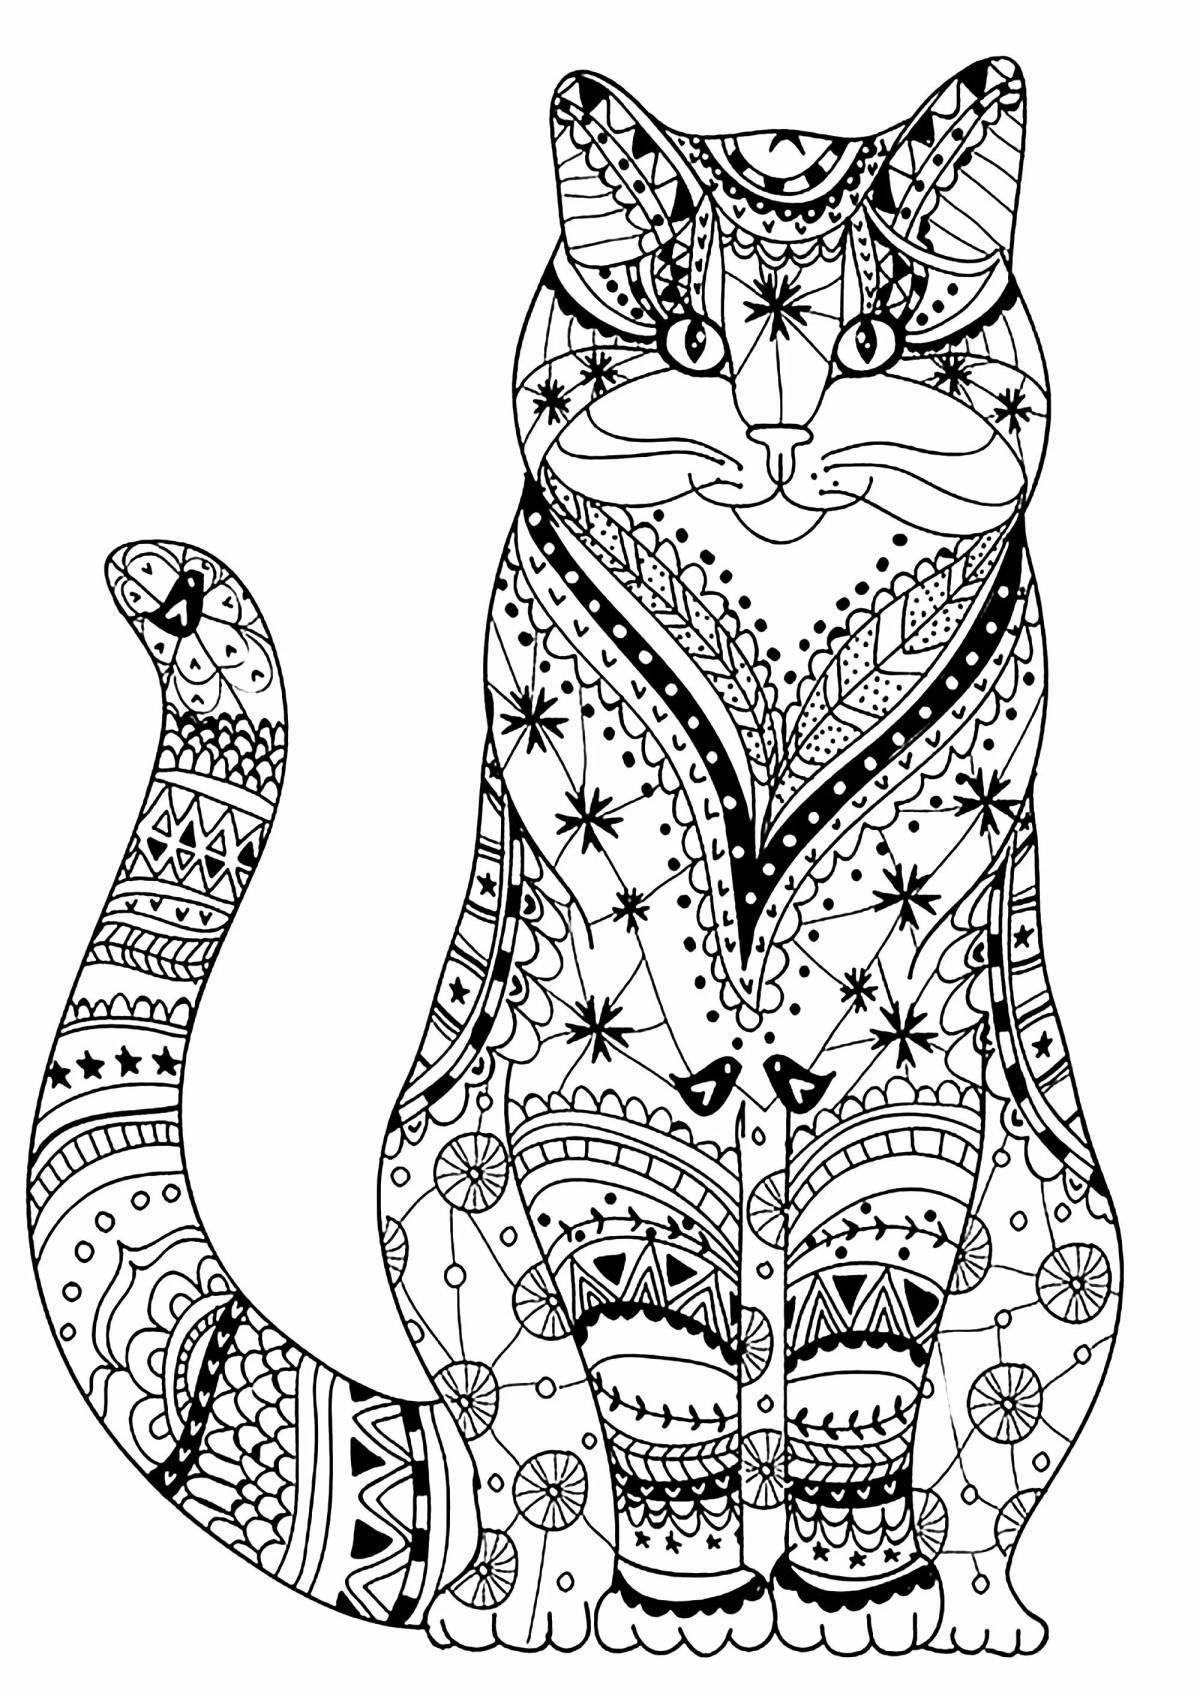 Showy animal coloring pages